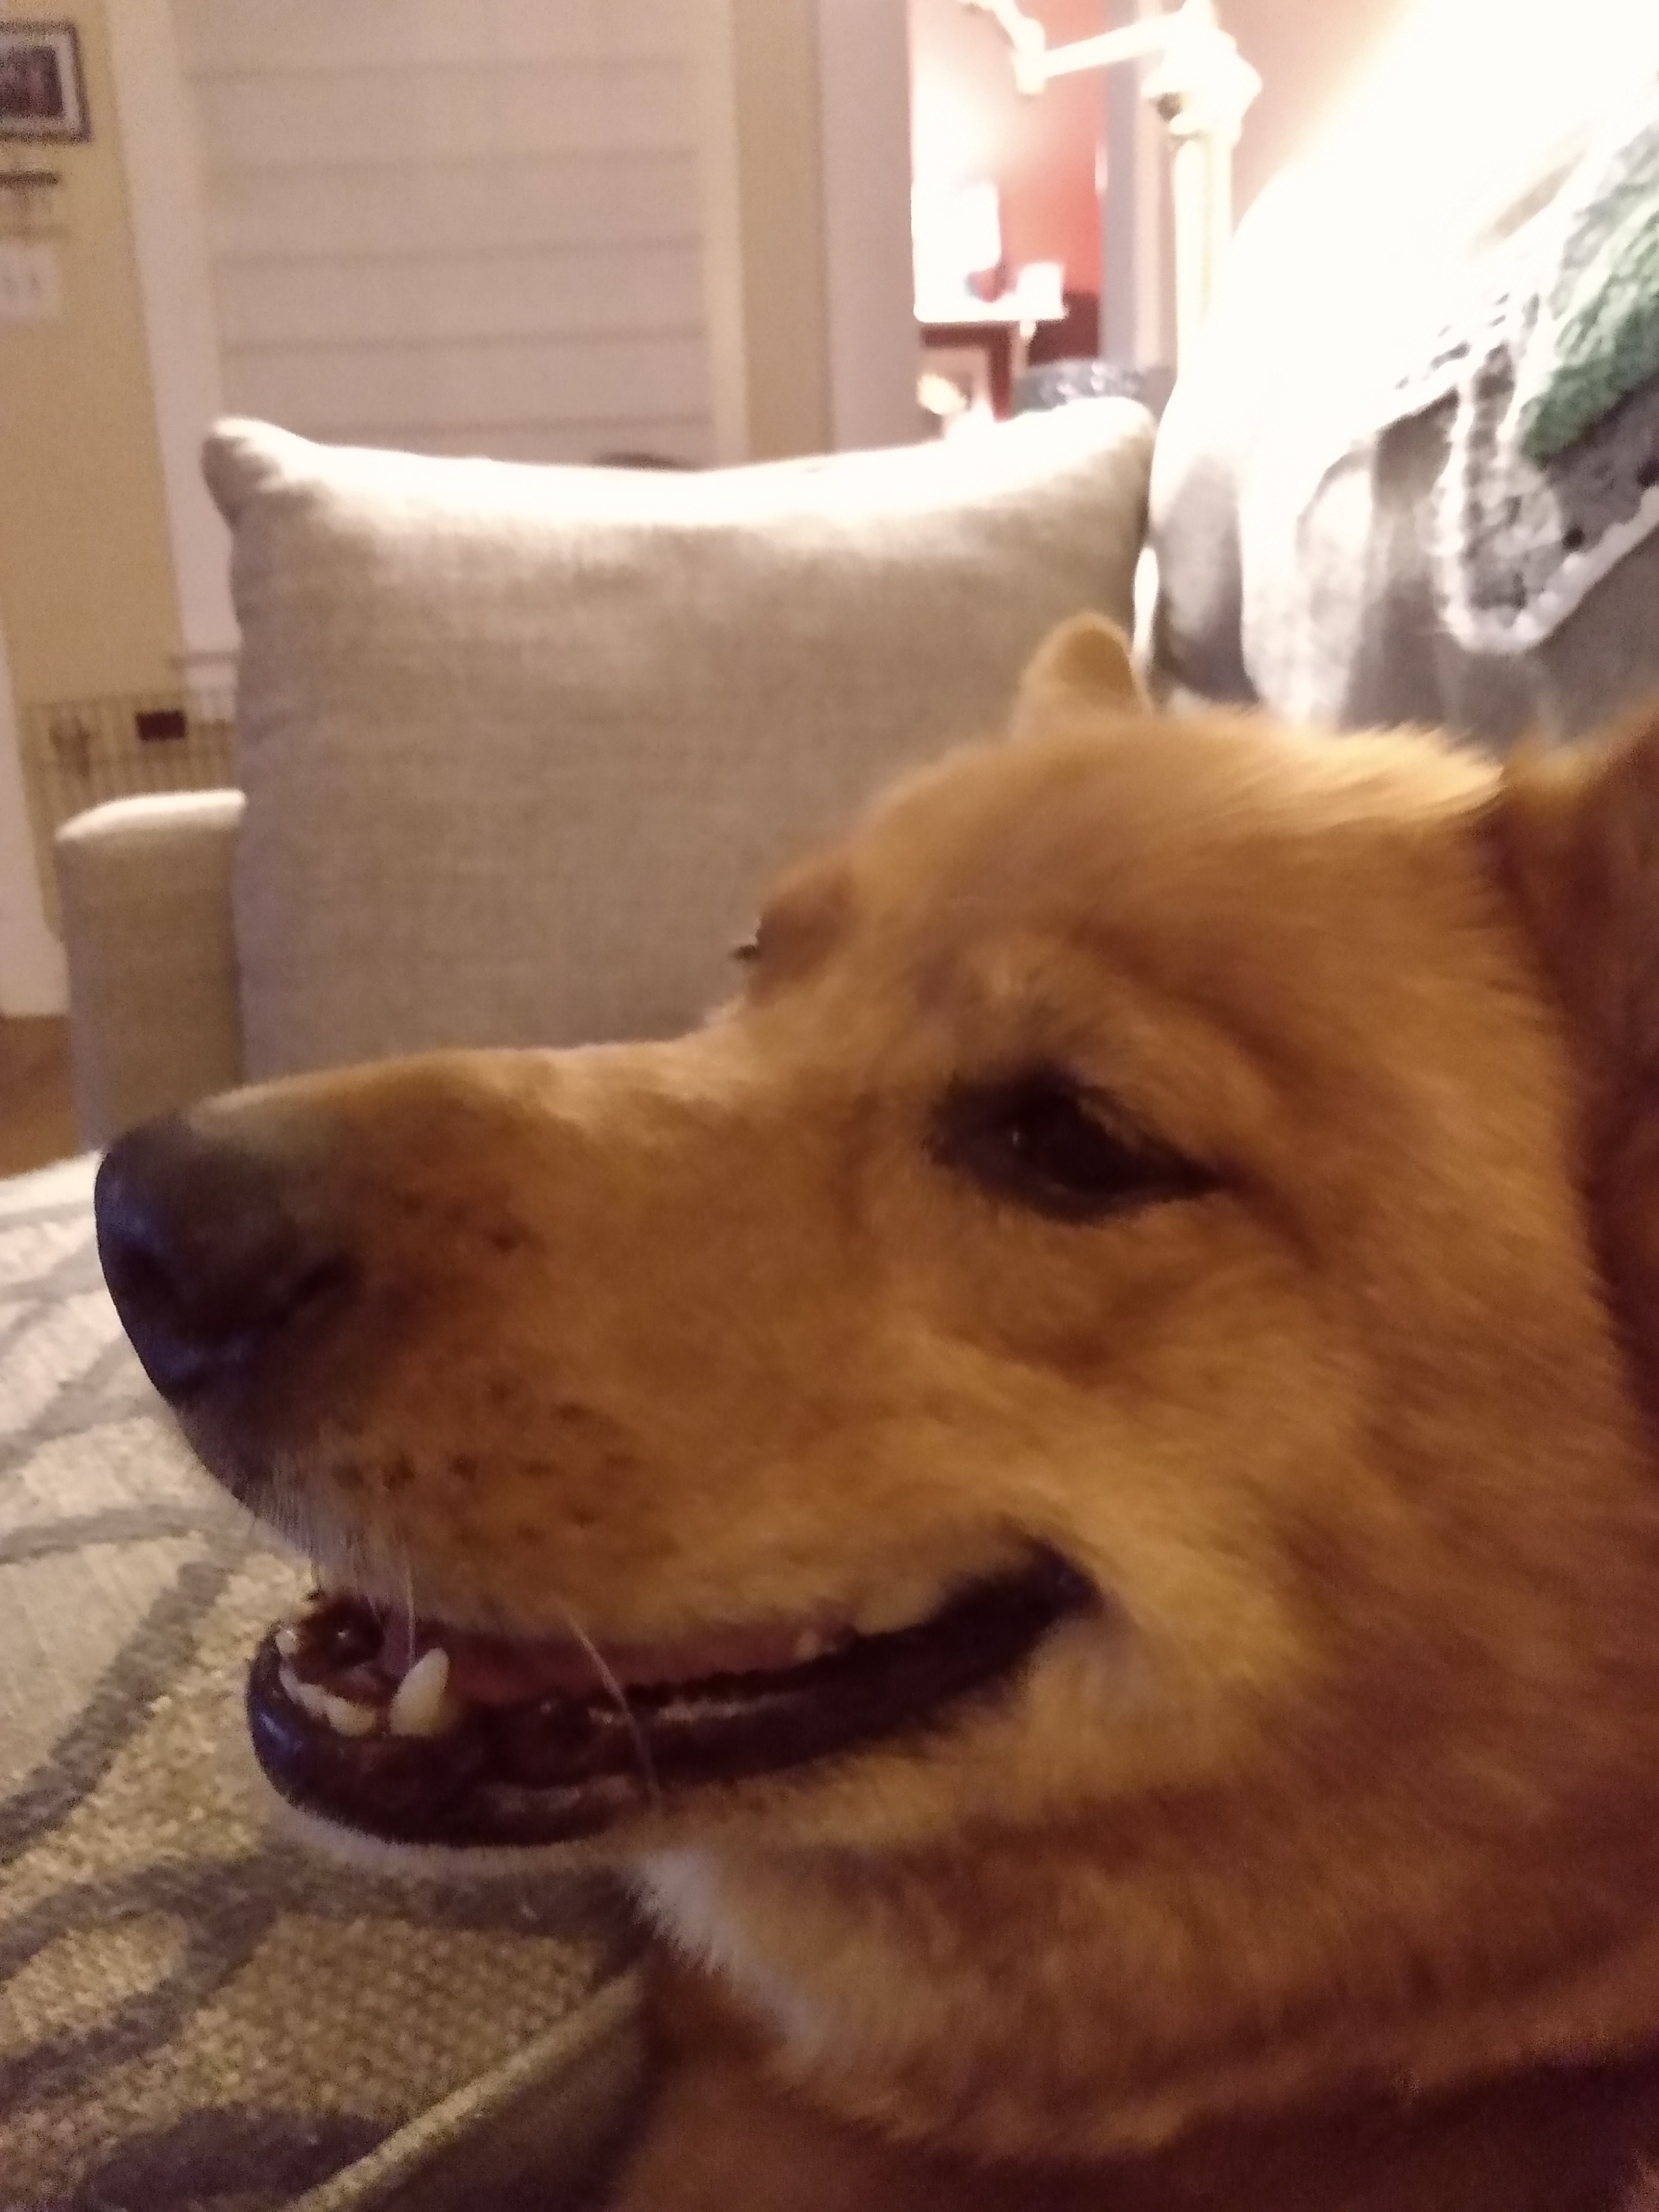 Stormy smiling on the couch.